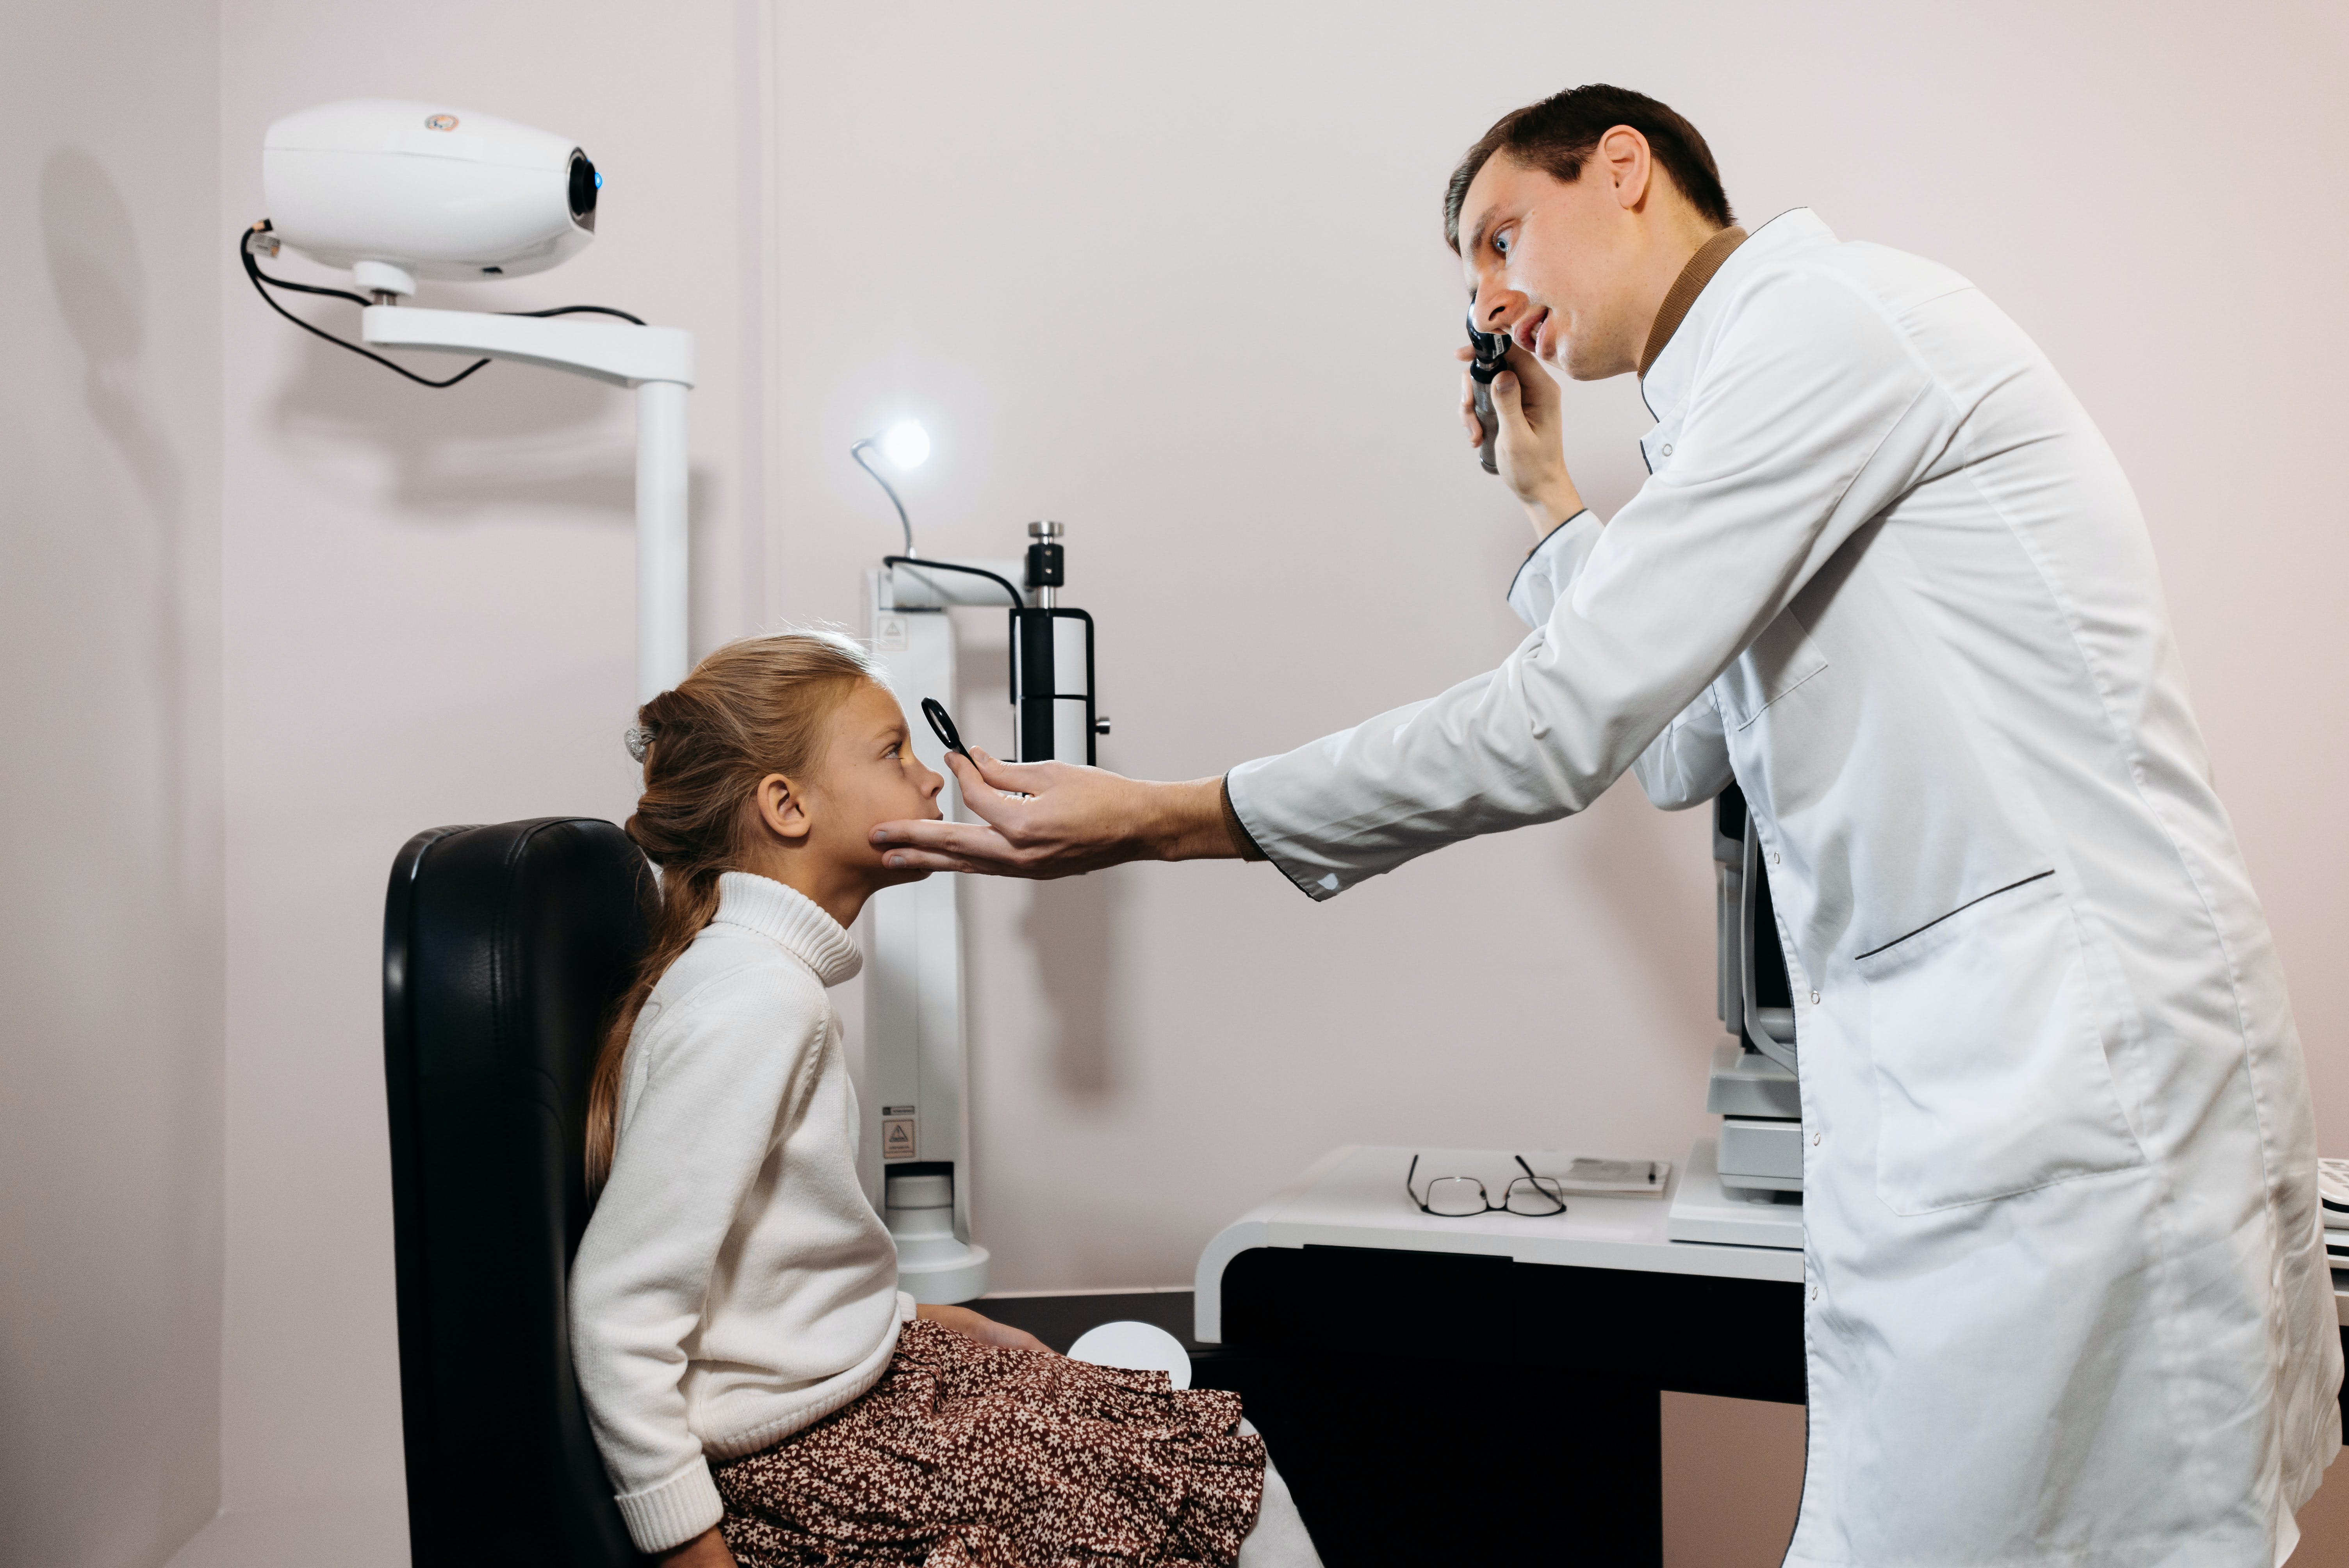 A little girl getting an eye examination. | Source: Pexels